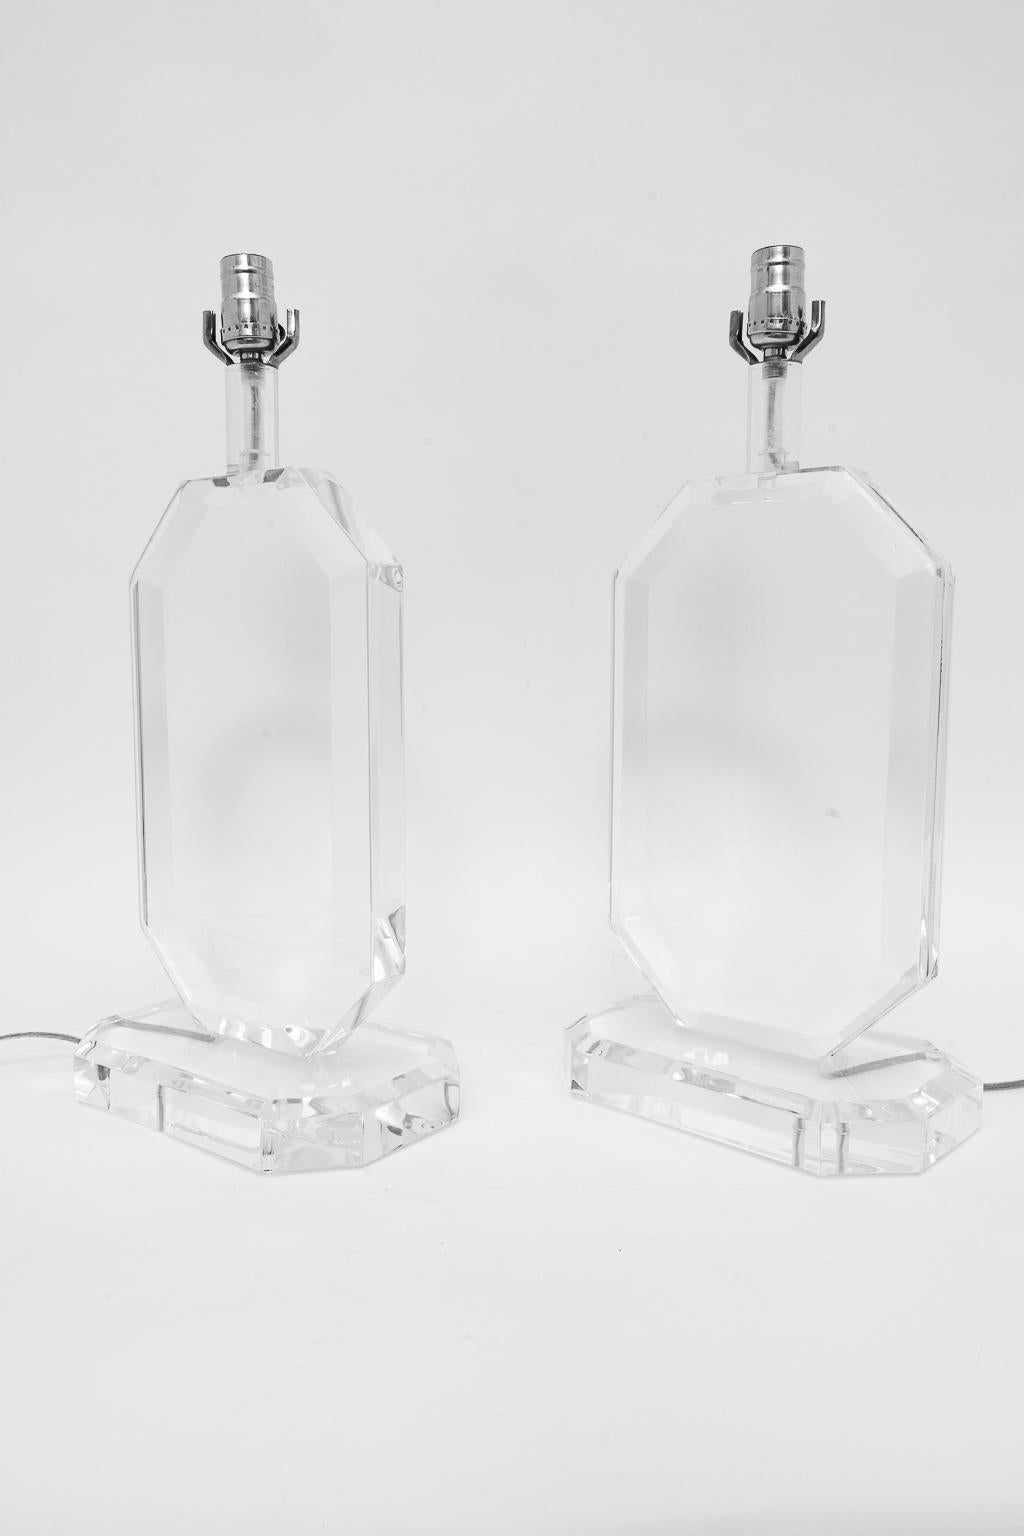 A pair of stunning and stylized Lucite table lamps in the style of Les Prismatiques acquired from a Palm Beach estate.